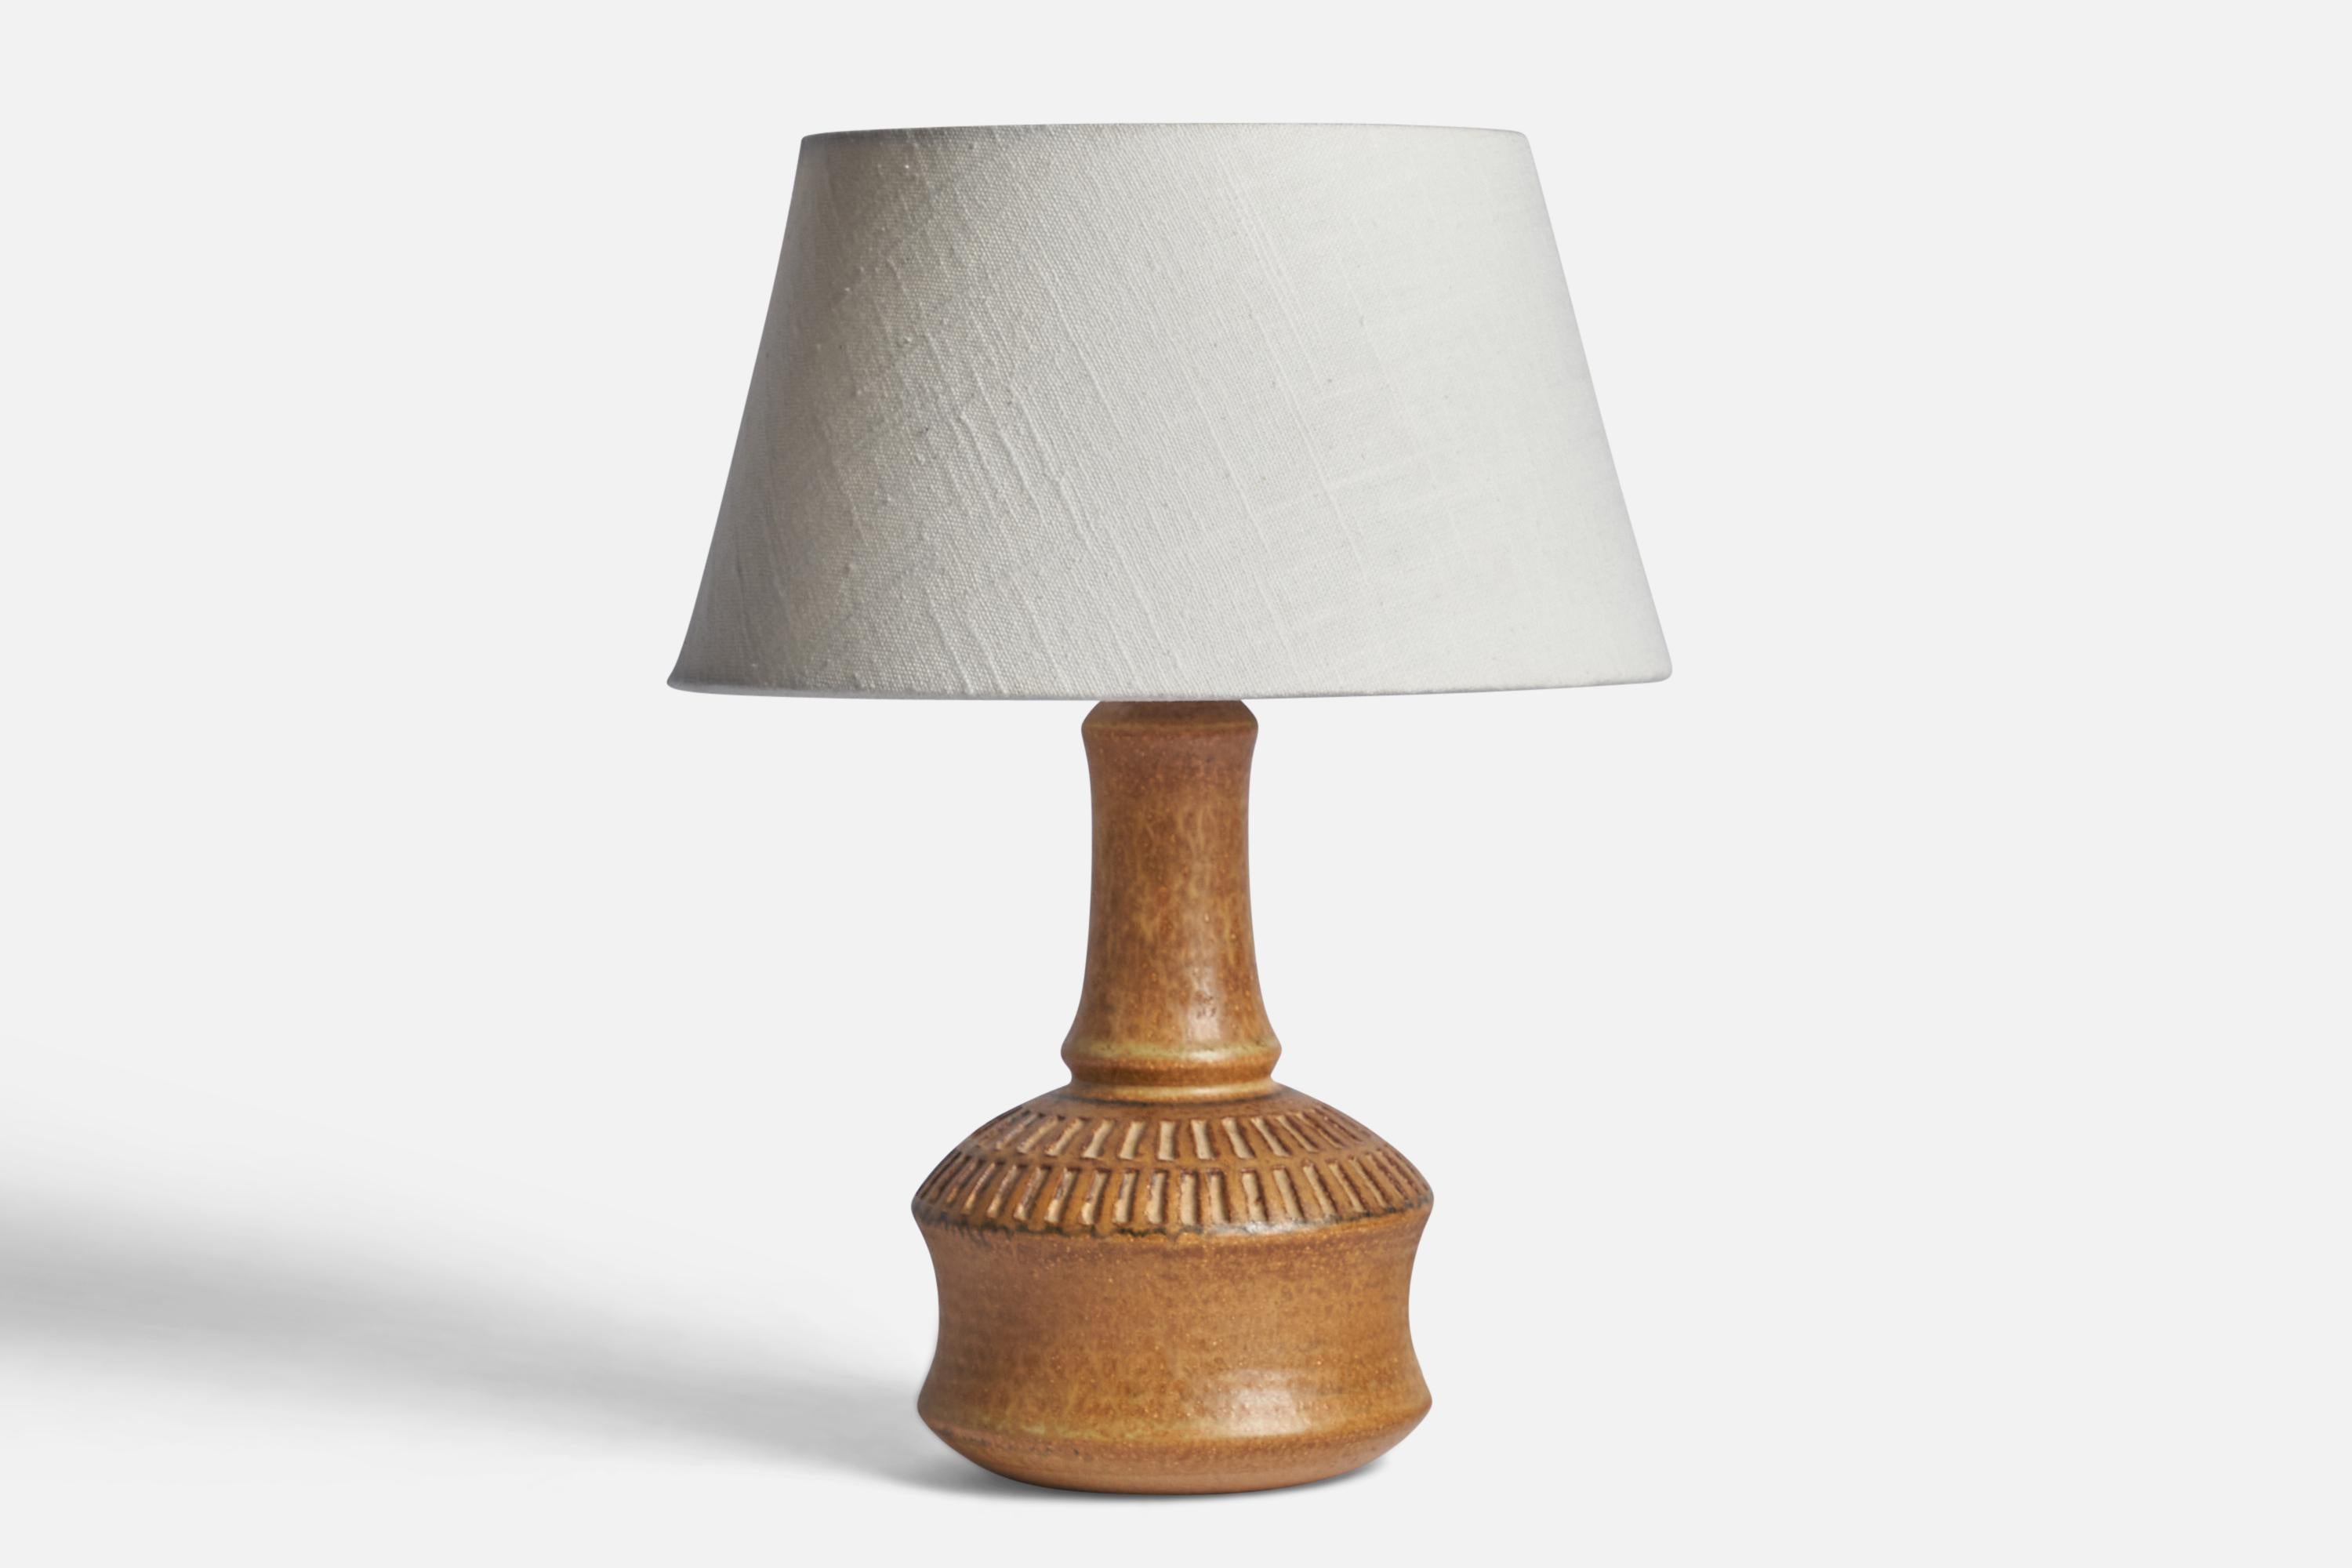 A light brown-glazed stoneware table lamp designed by Joseph Simon and produced by Søholm, Bornholm, Denmark, 1960s.

Dimensions of Lamp (inches): 10.25